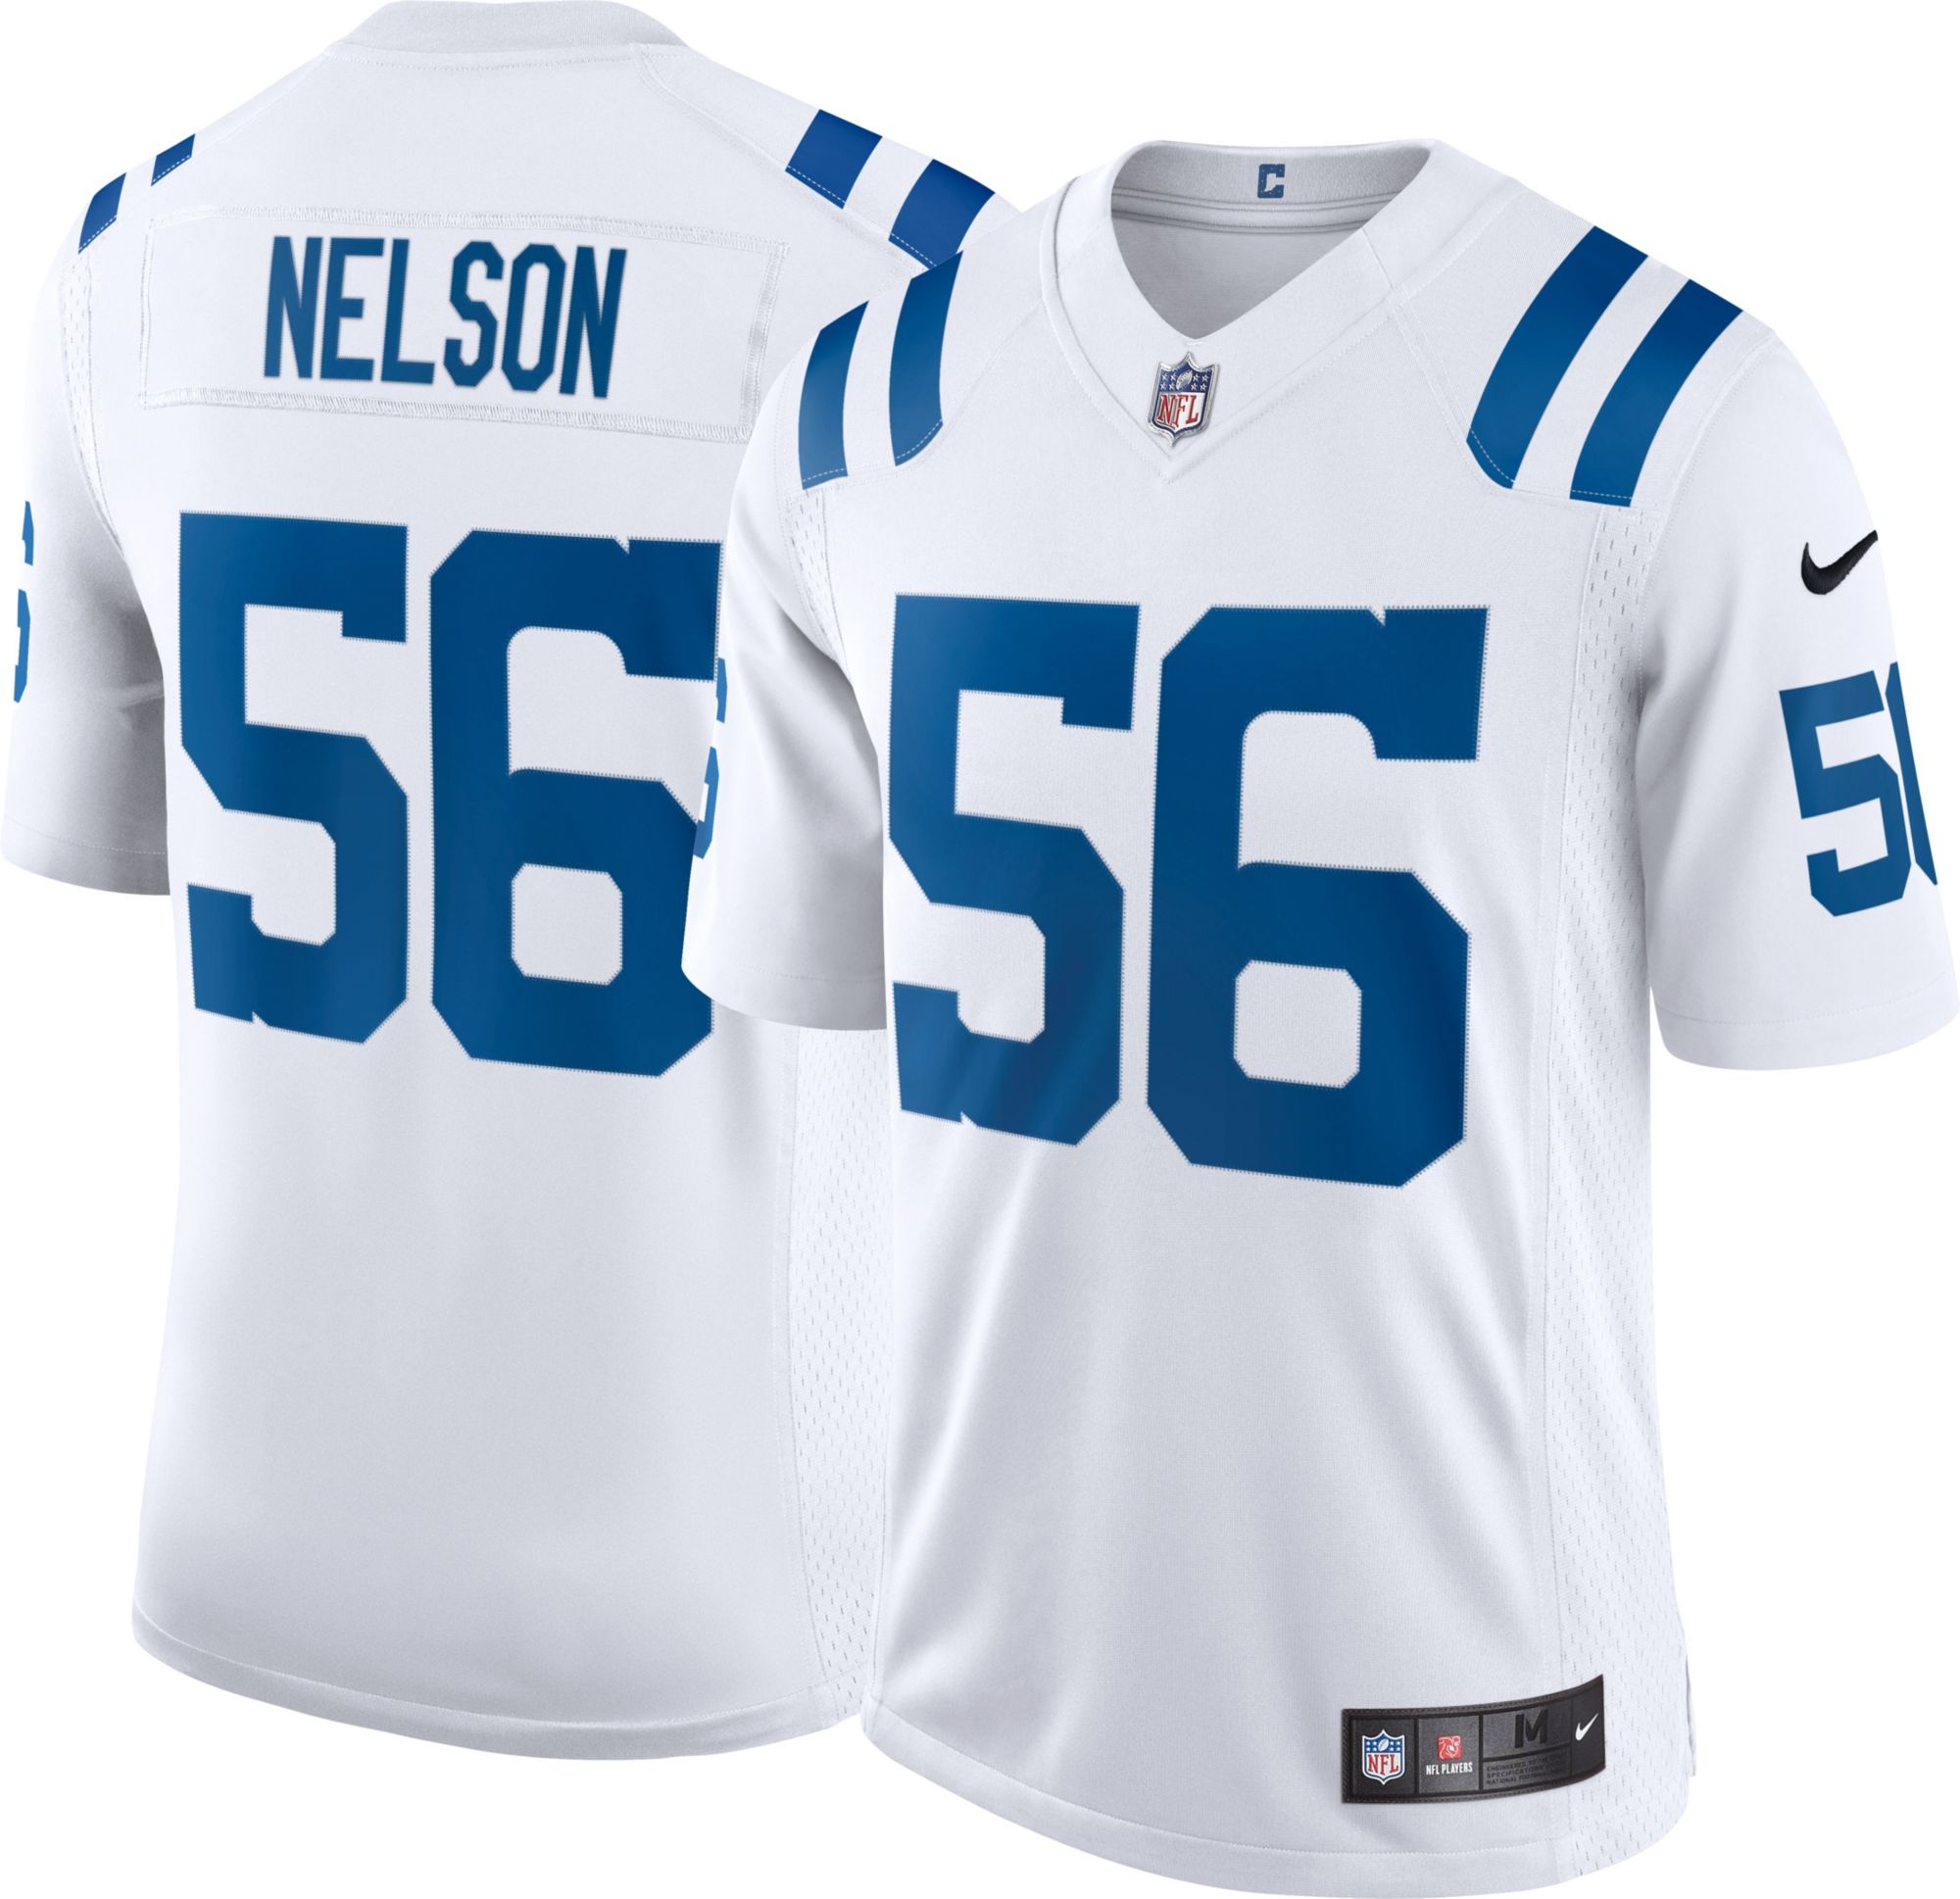 quenton nelson jersey